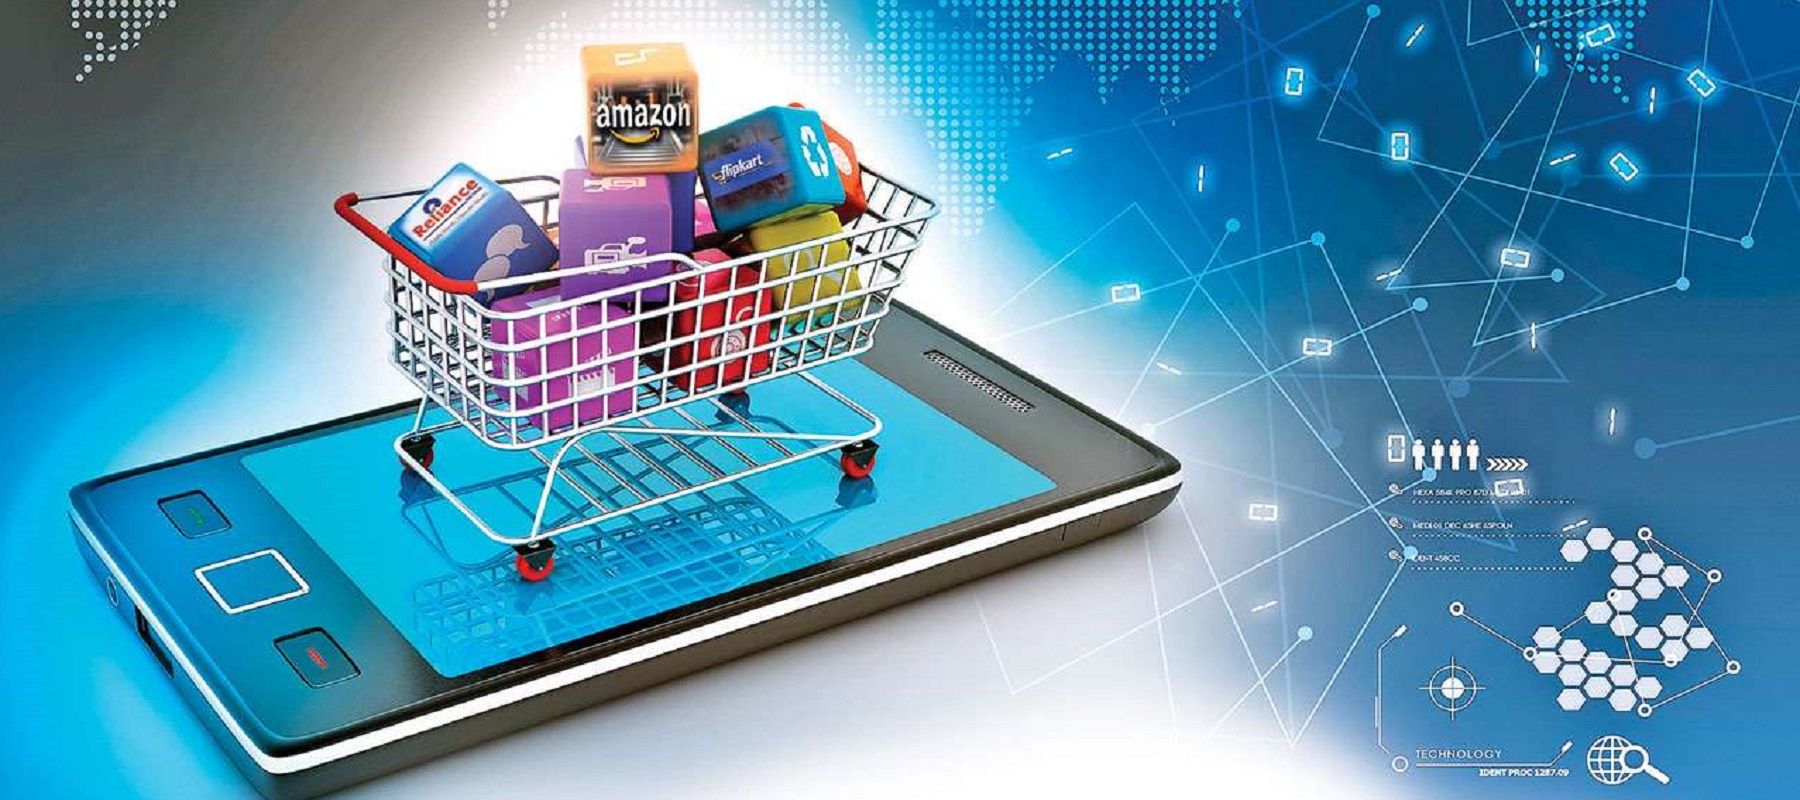 e-Commerce poised to capture 41% of global retail sales by 2027, BCG reports